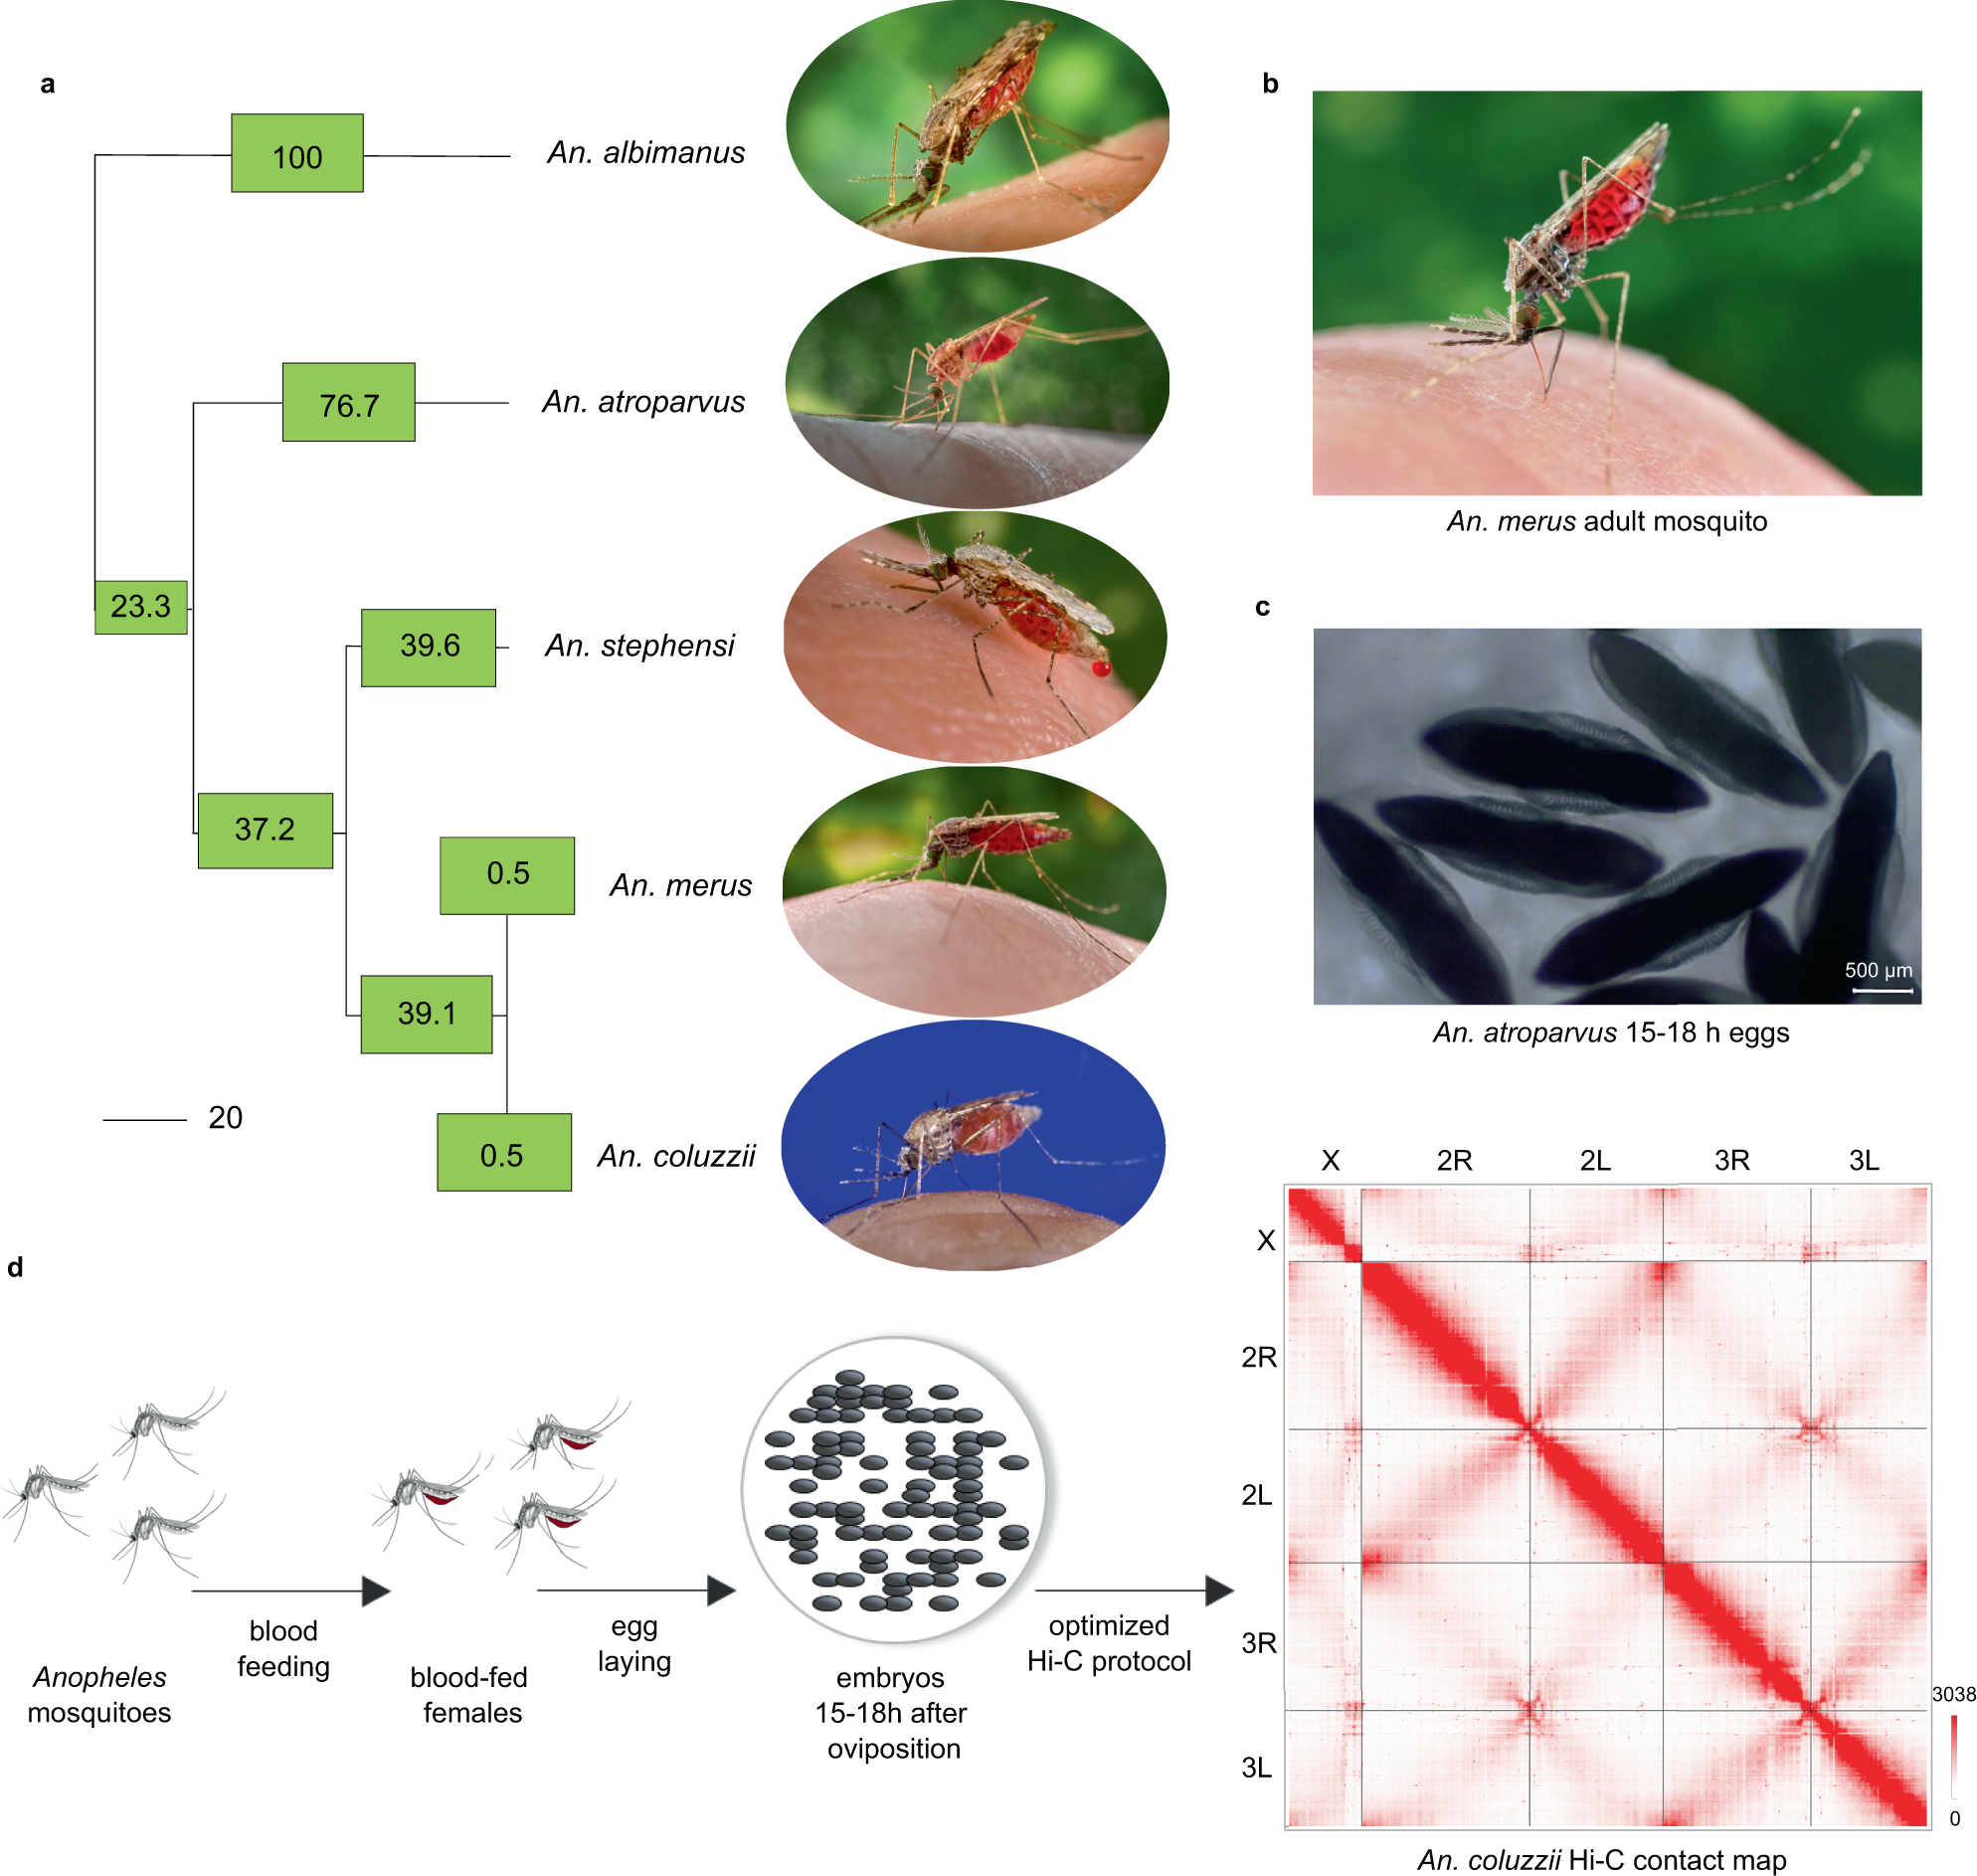 Anopheles mosquitoes reveal new principles of 3D genome organization in insects Nature Communications